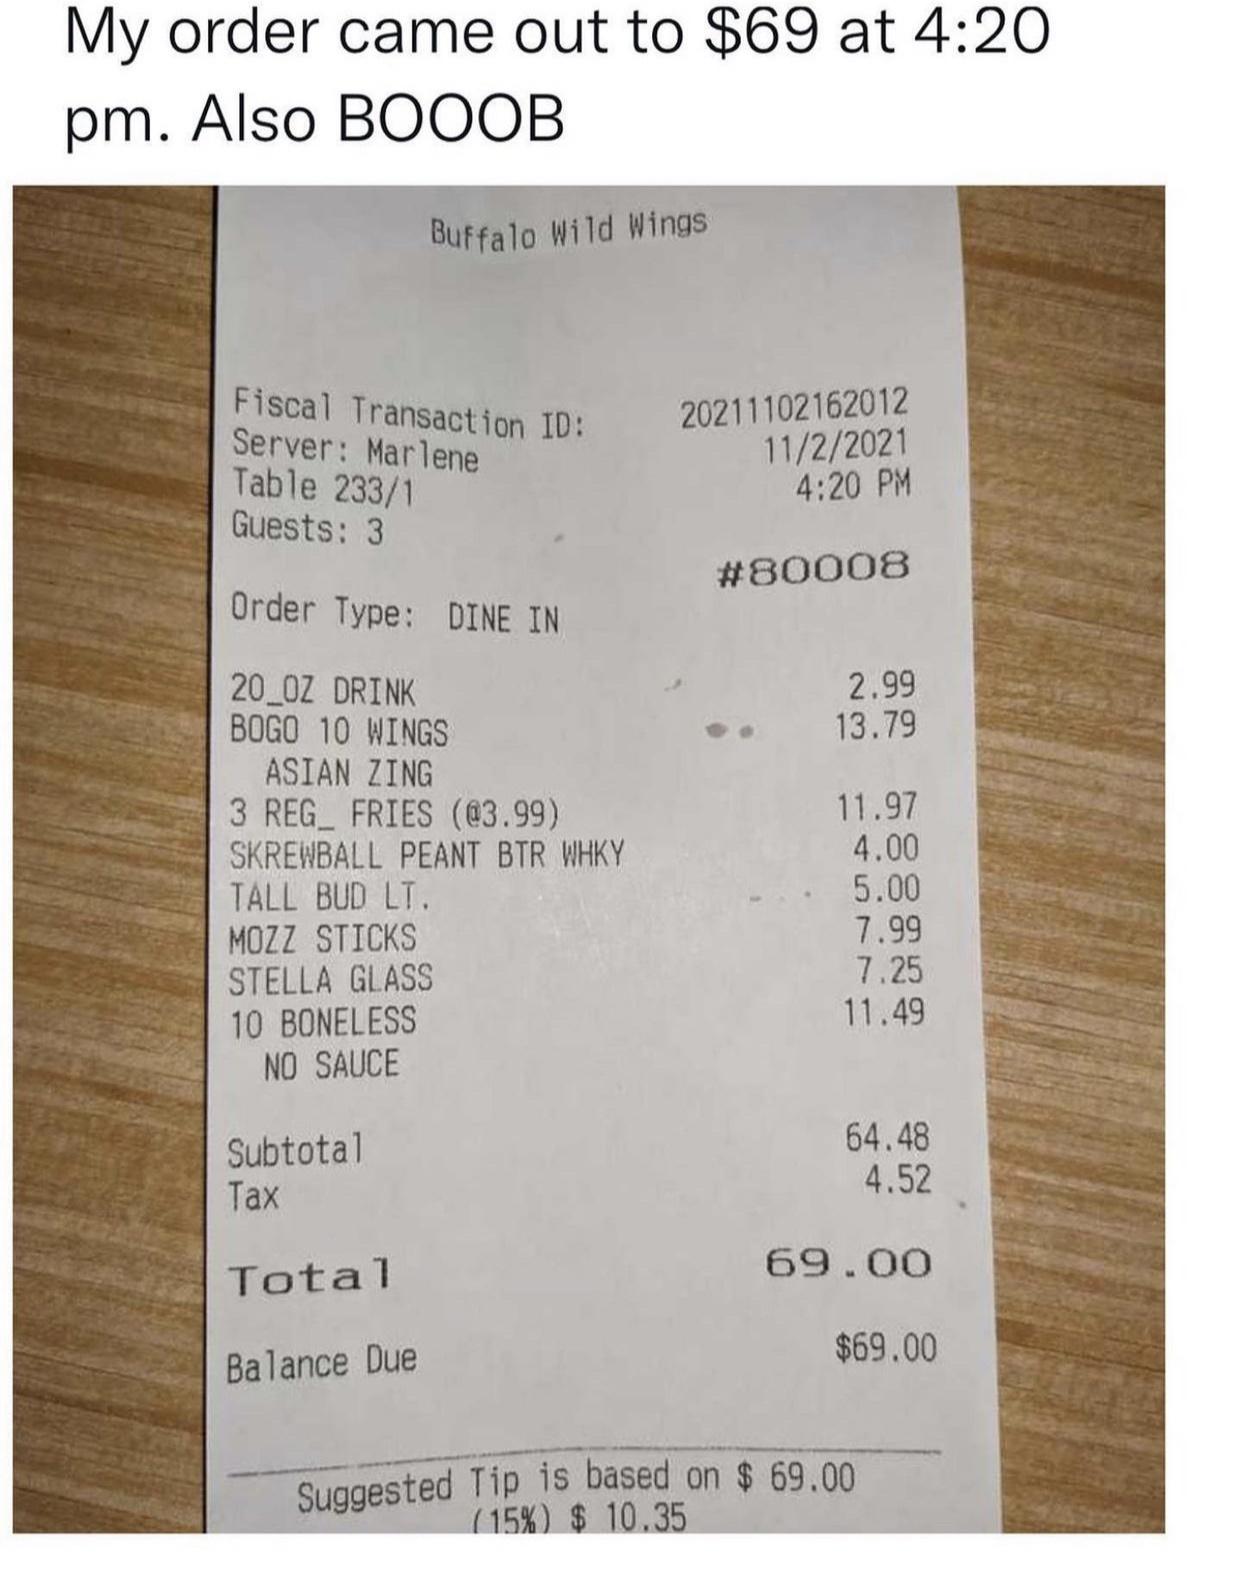 new memes - receipt - My order came out to $69 at . Also Booob Buffalo Wild Wings Fiscal Transaction Id Server Marlene Table 2331 Guests 3 20211102162012 1122021 Order Type Dine In 2.99 13.79 20_OZ Drink Bogo 10 Wings Asian Zing 3 REG_ Fries .99 Skrewball